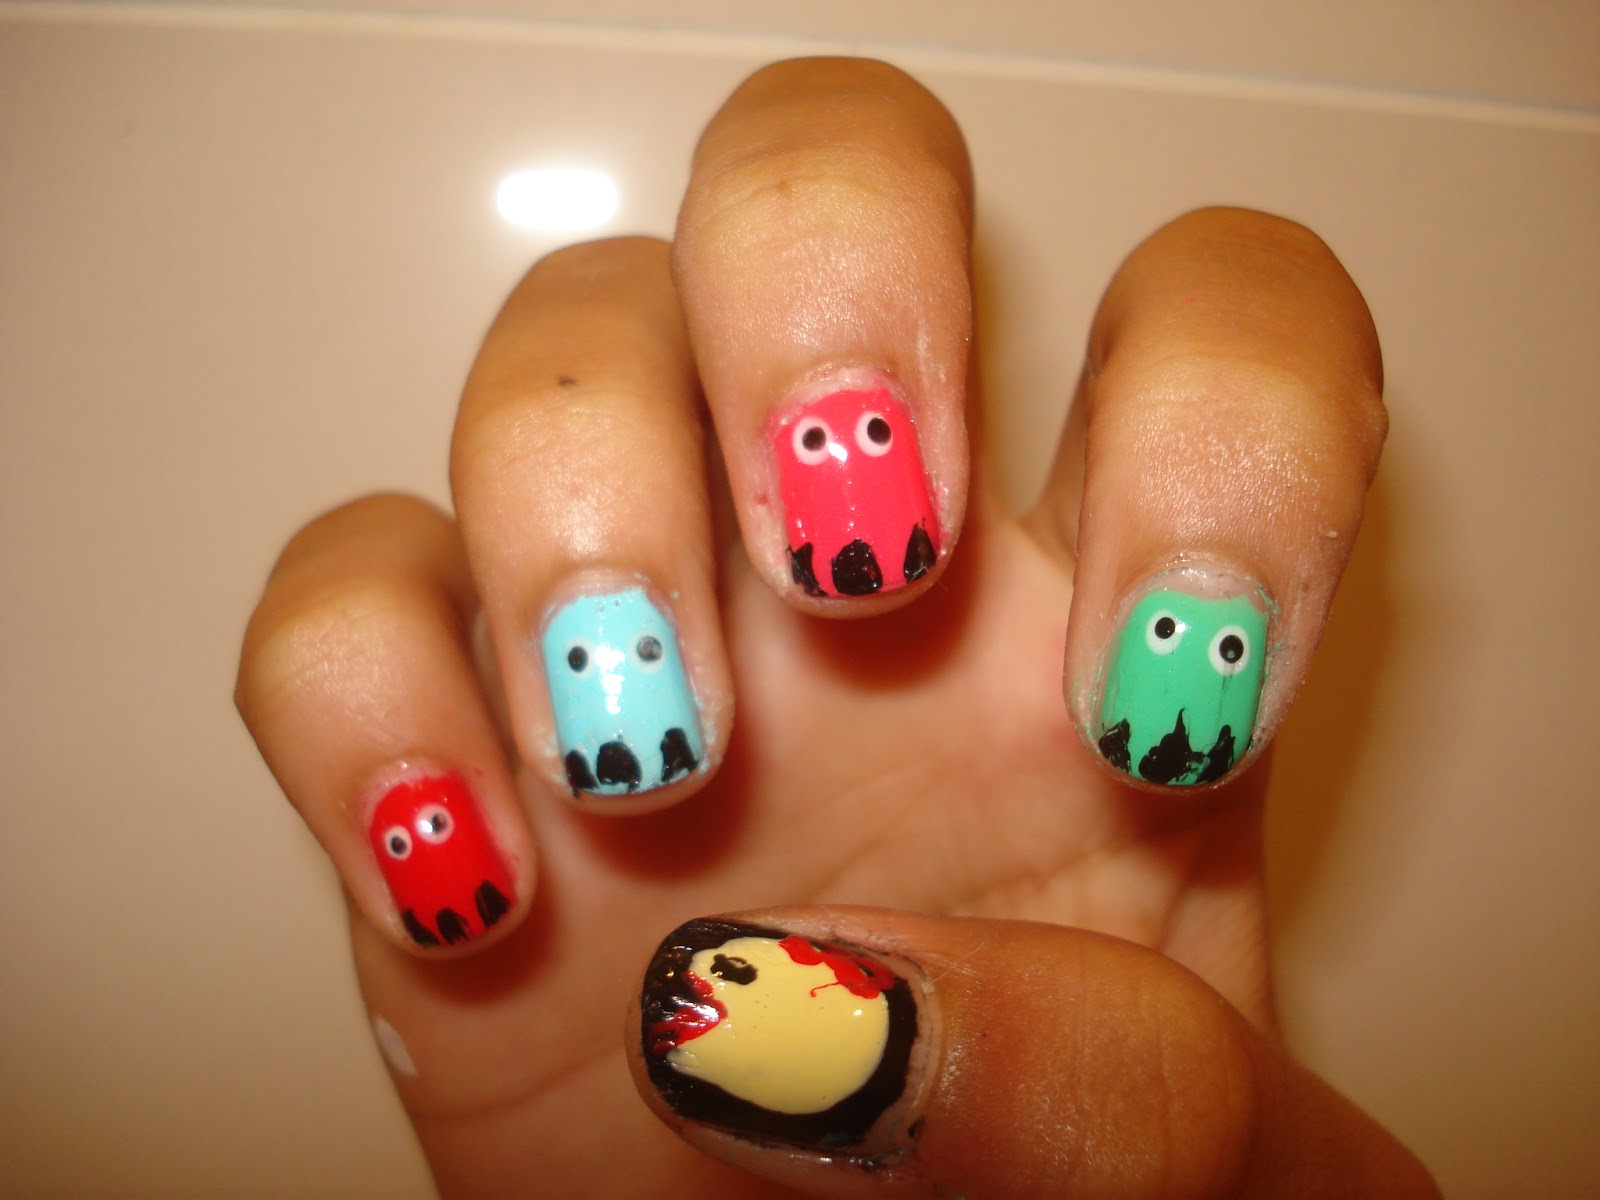 2. Pacman Themed Nail Art - wide 3